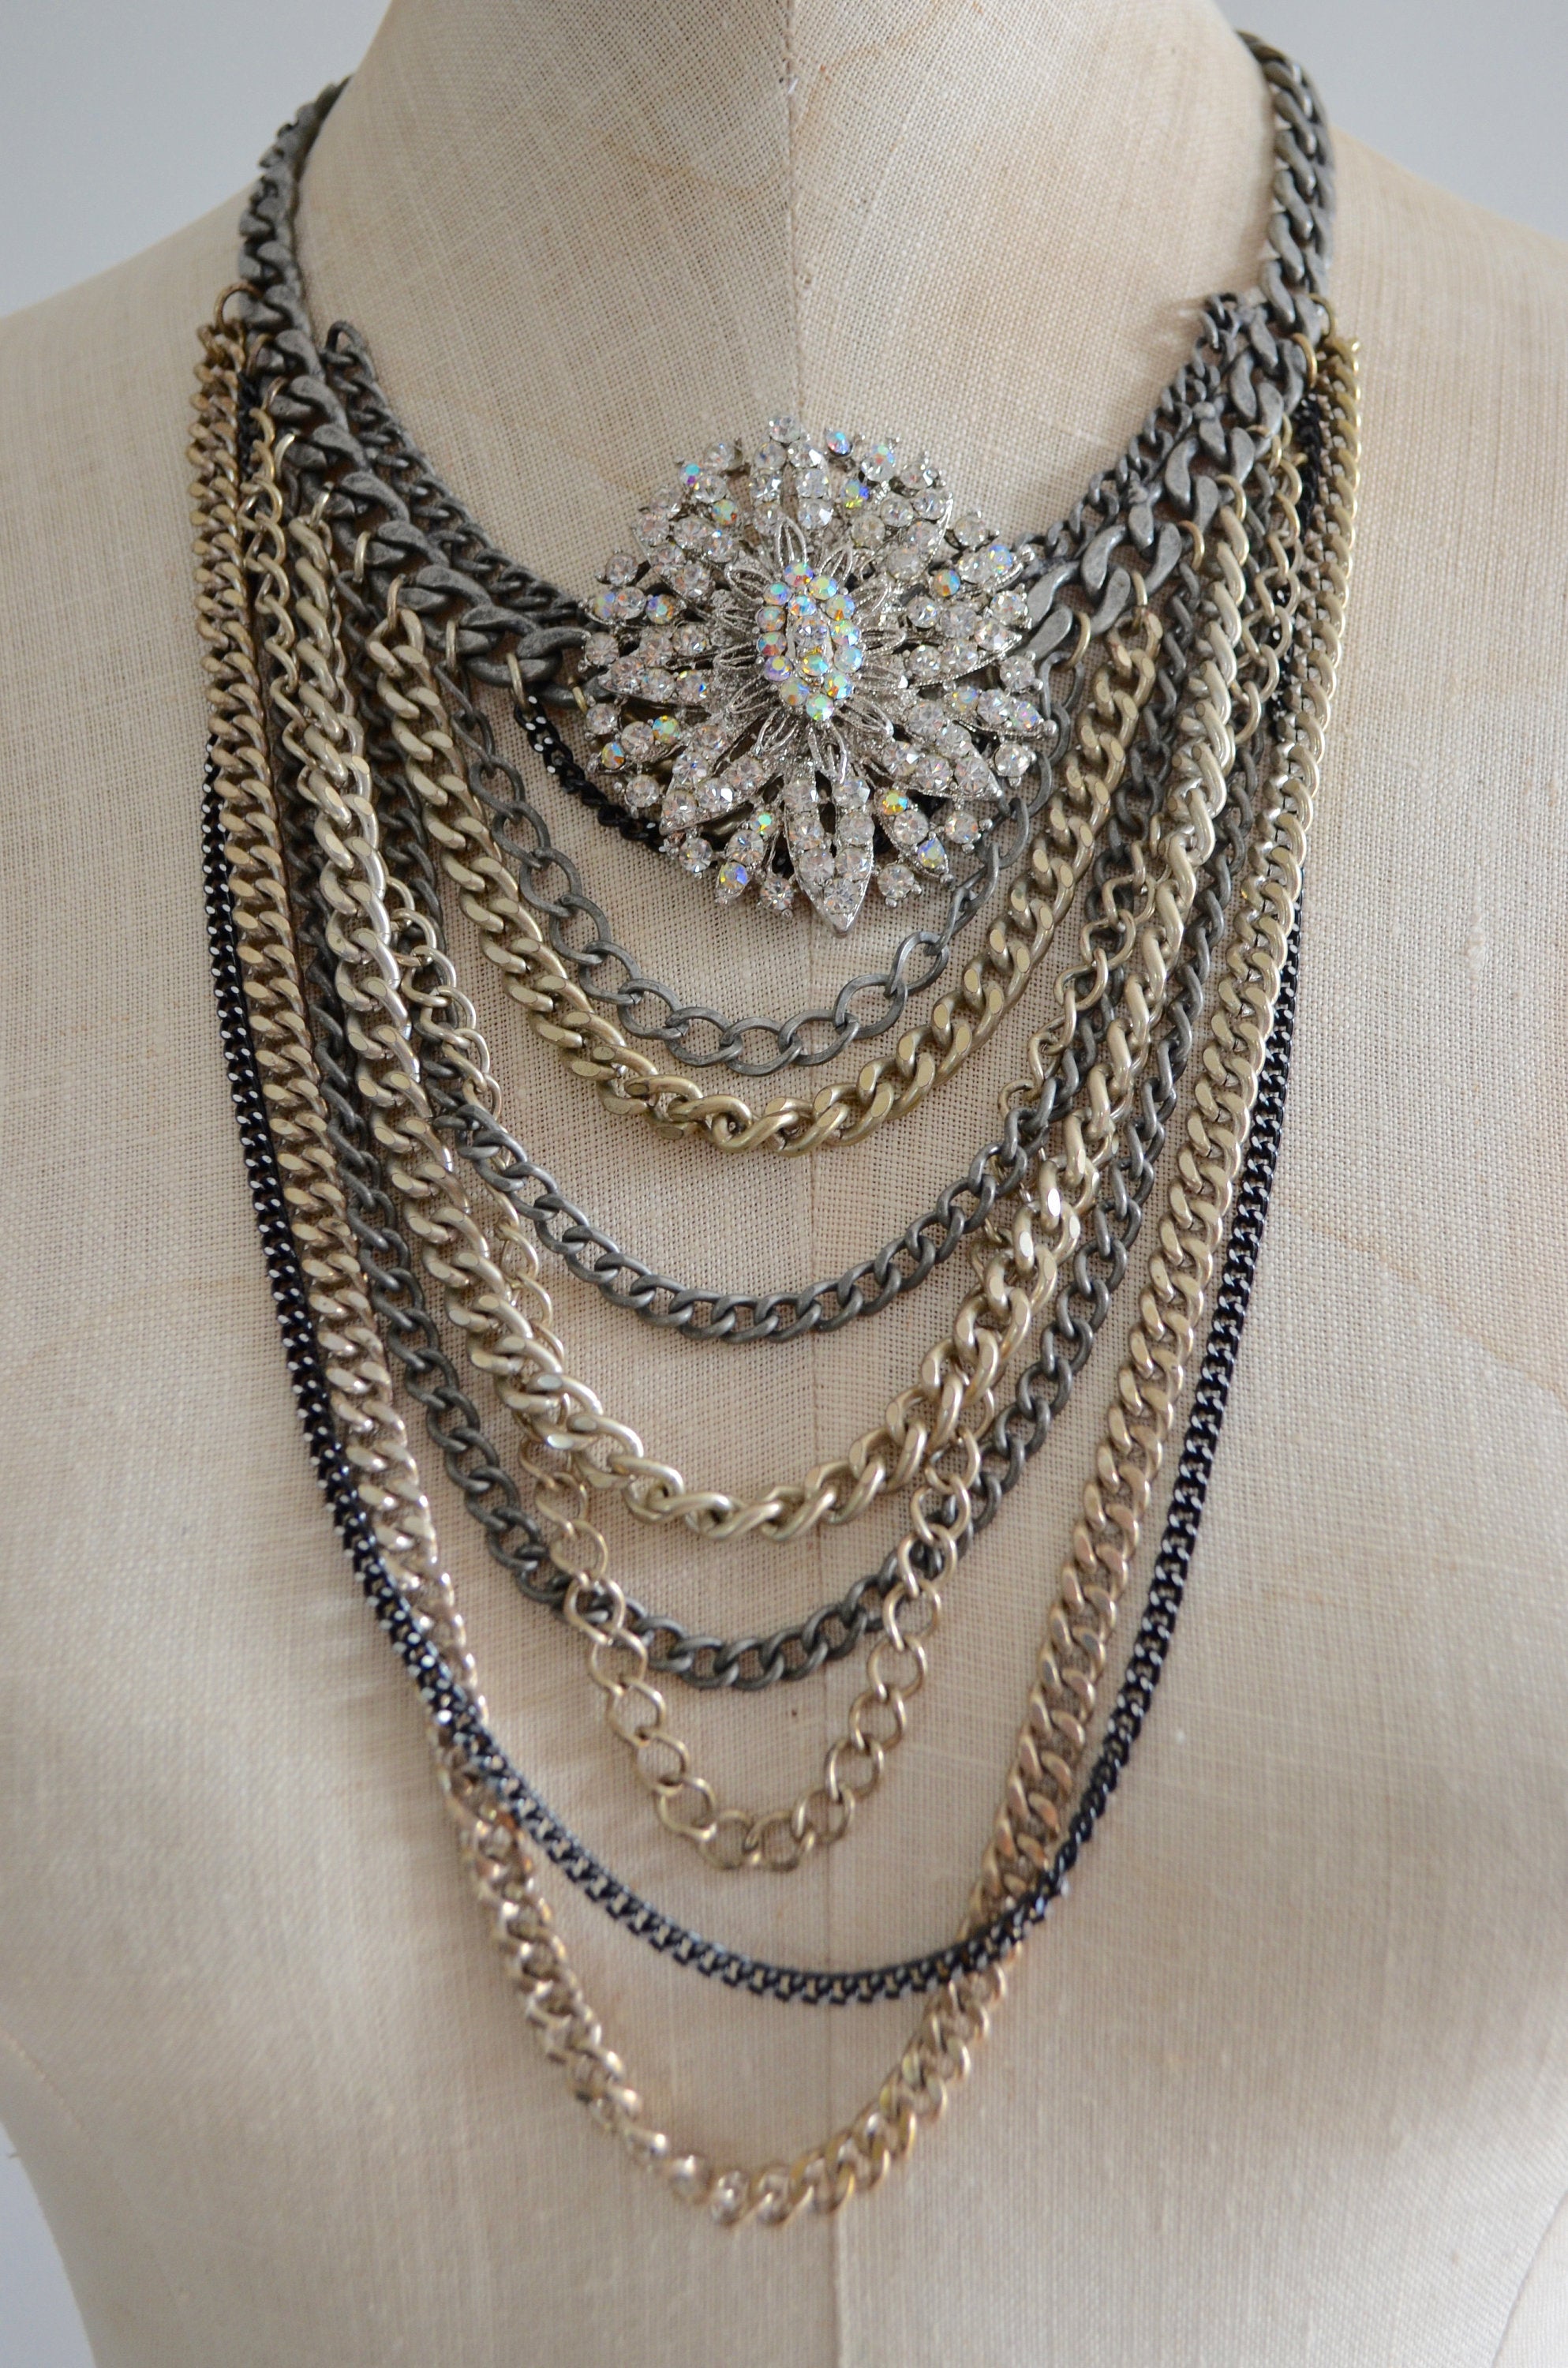 Statement Multi Layered Lengths Of Chain Antique Silver Necklace With Filigree Brooch Rockstar